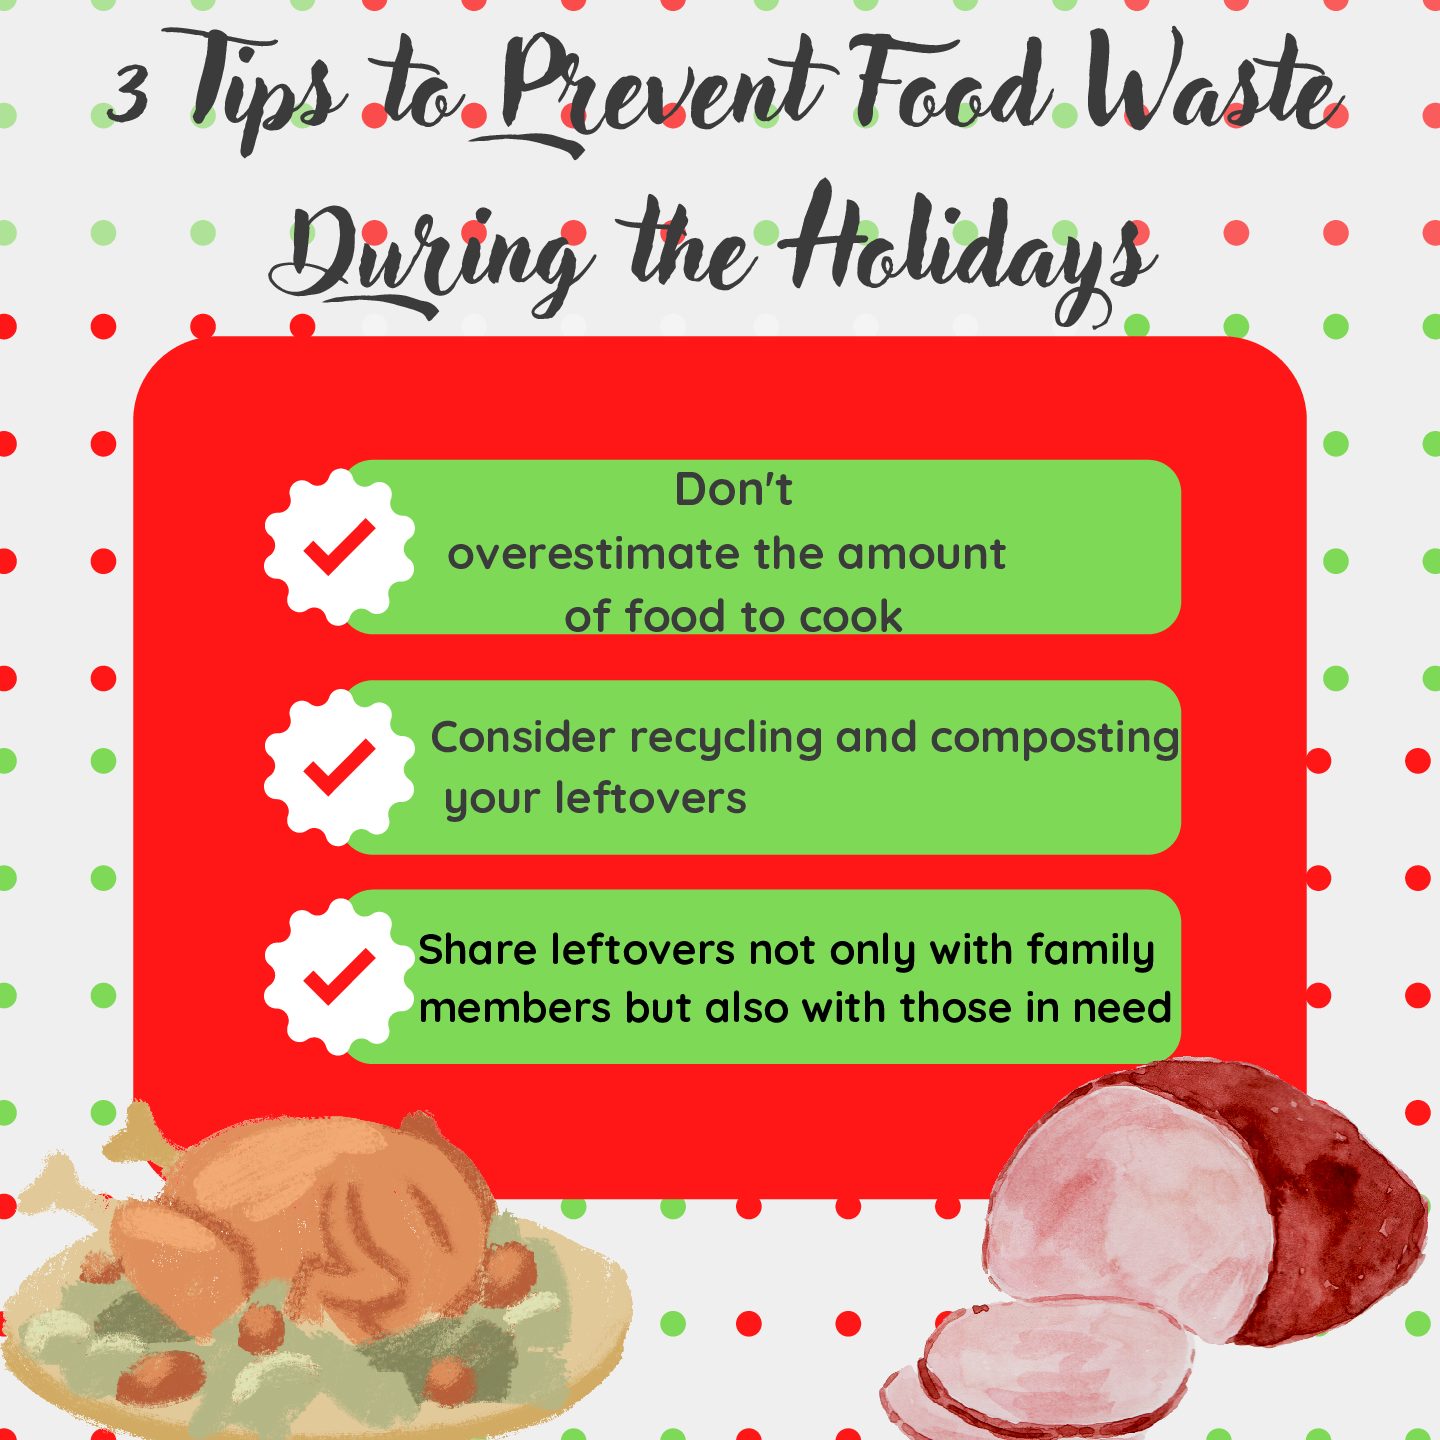 Certain measures can be taken to prevent holiday waste.